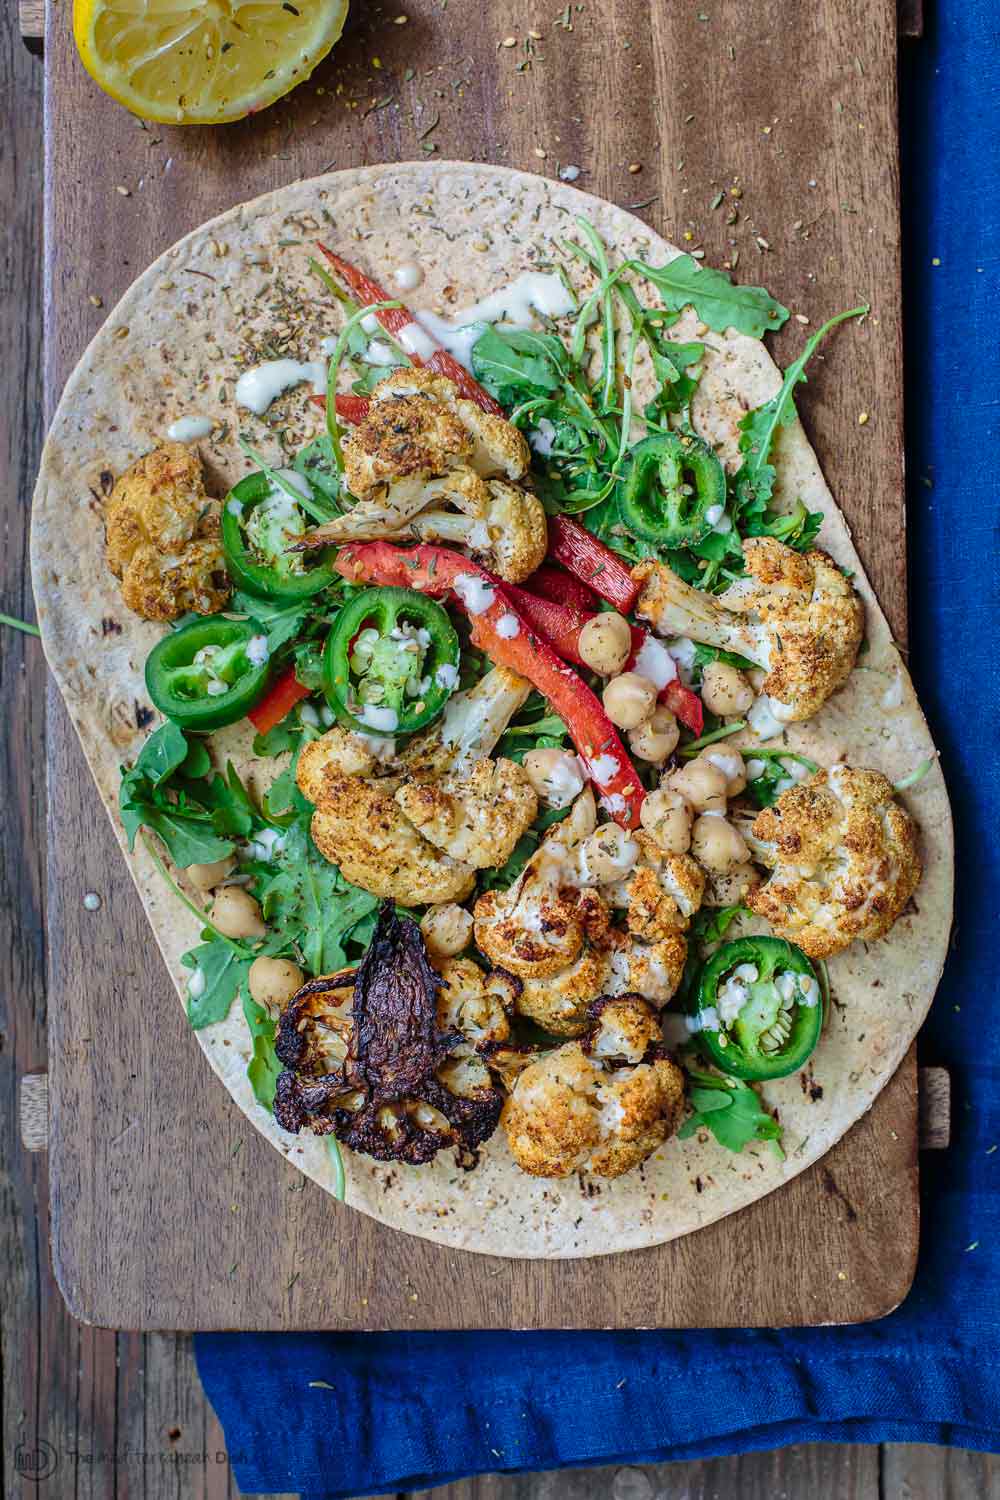 Flatout Wraps with Cauliflower, tahini, peppers and additional vegetables